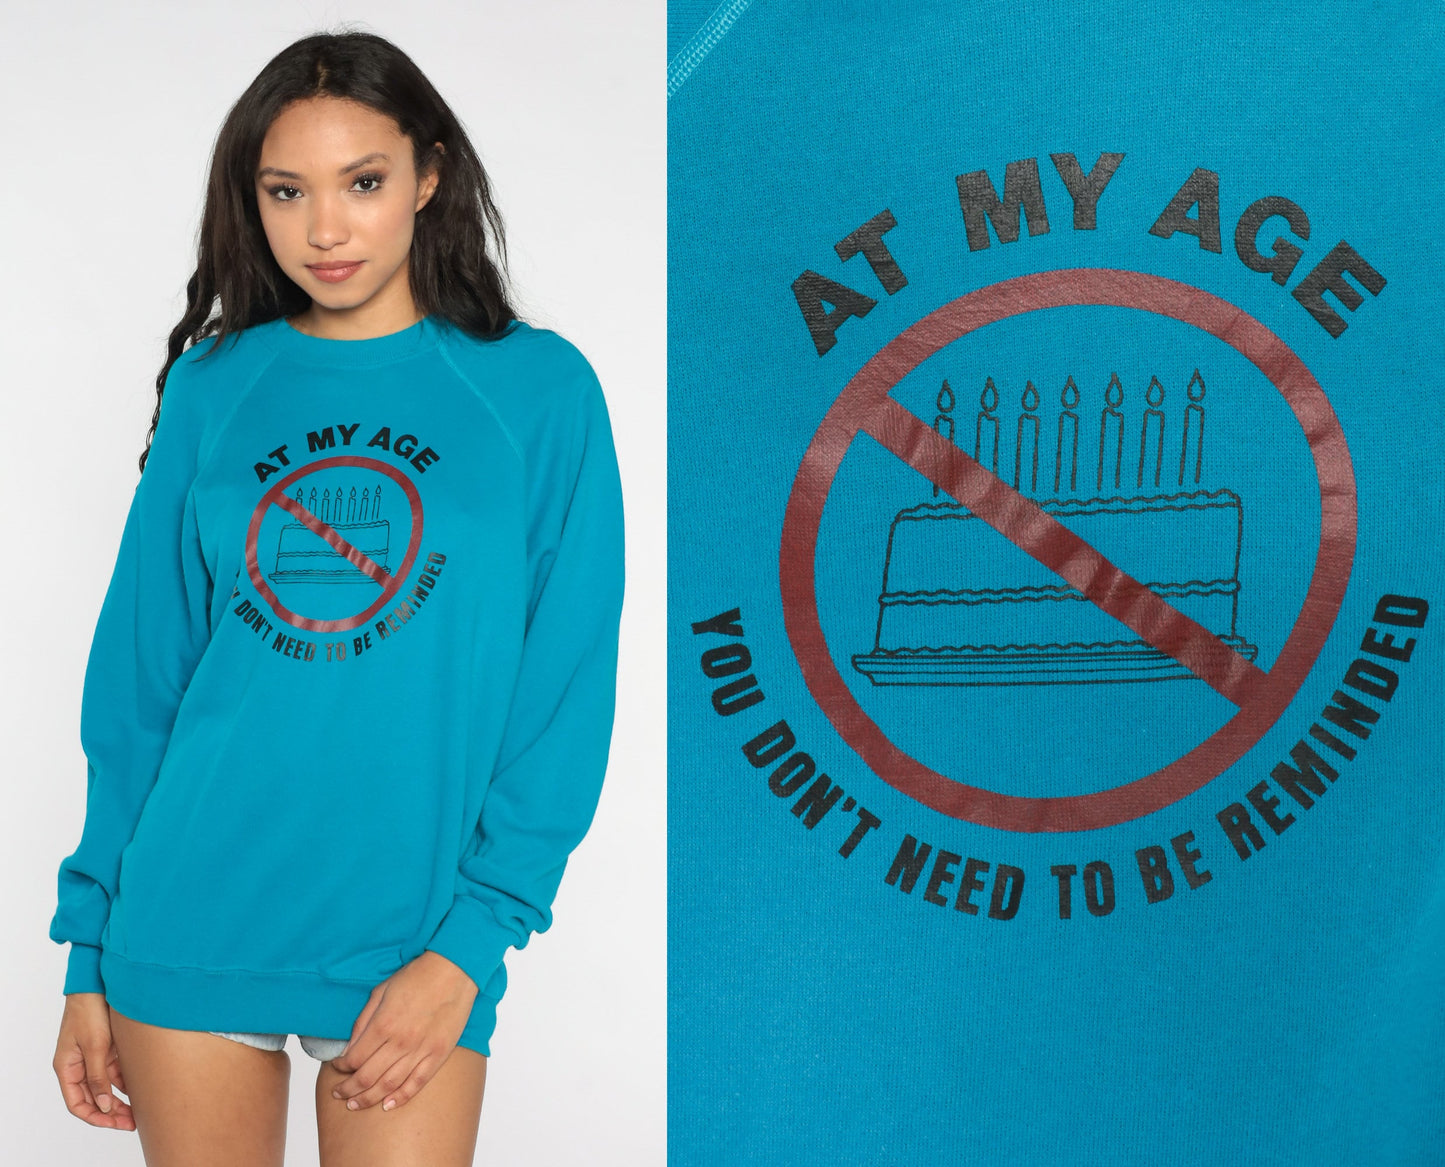 Funny Birthday Sweatshirt 80s At My Age You Don't Need To Be Reminded Shirt Aging Joke Novelty Grandpa Grandma Sweater Vintage Blue Large L